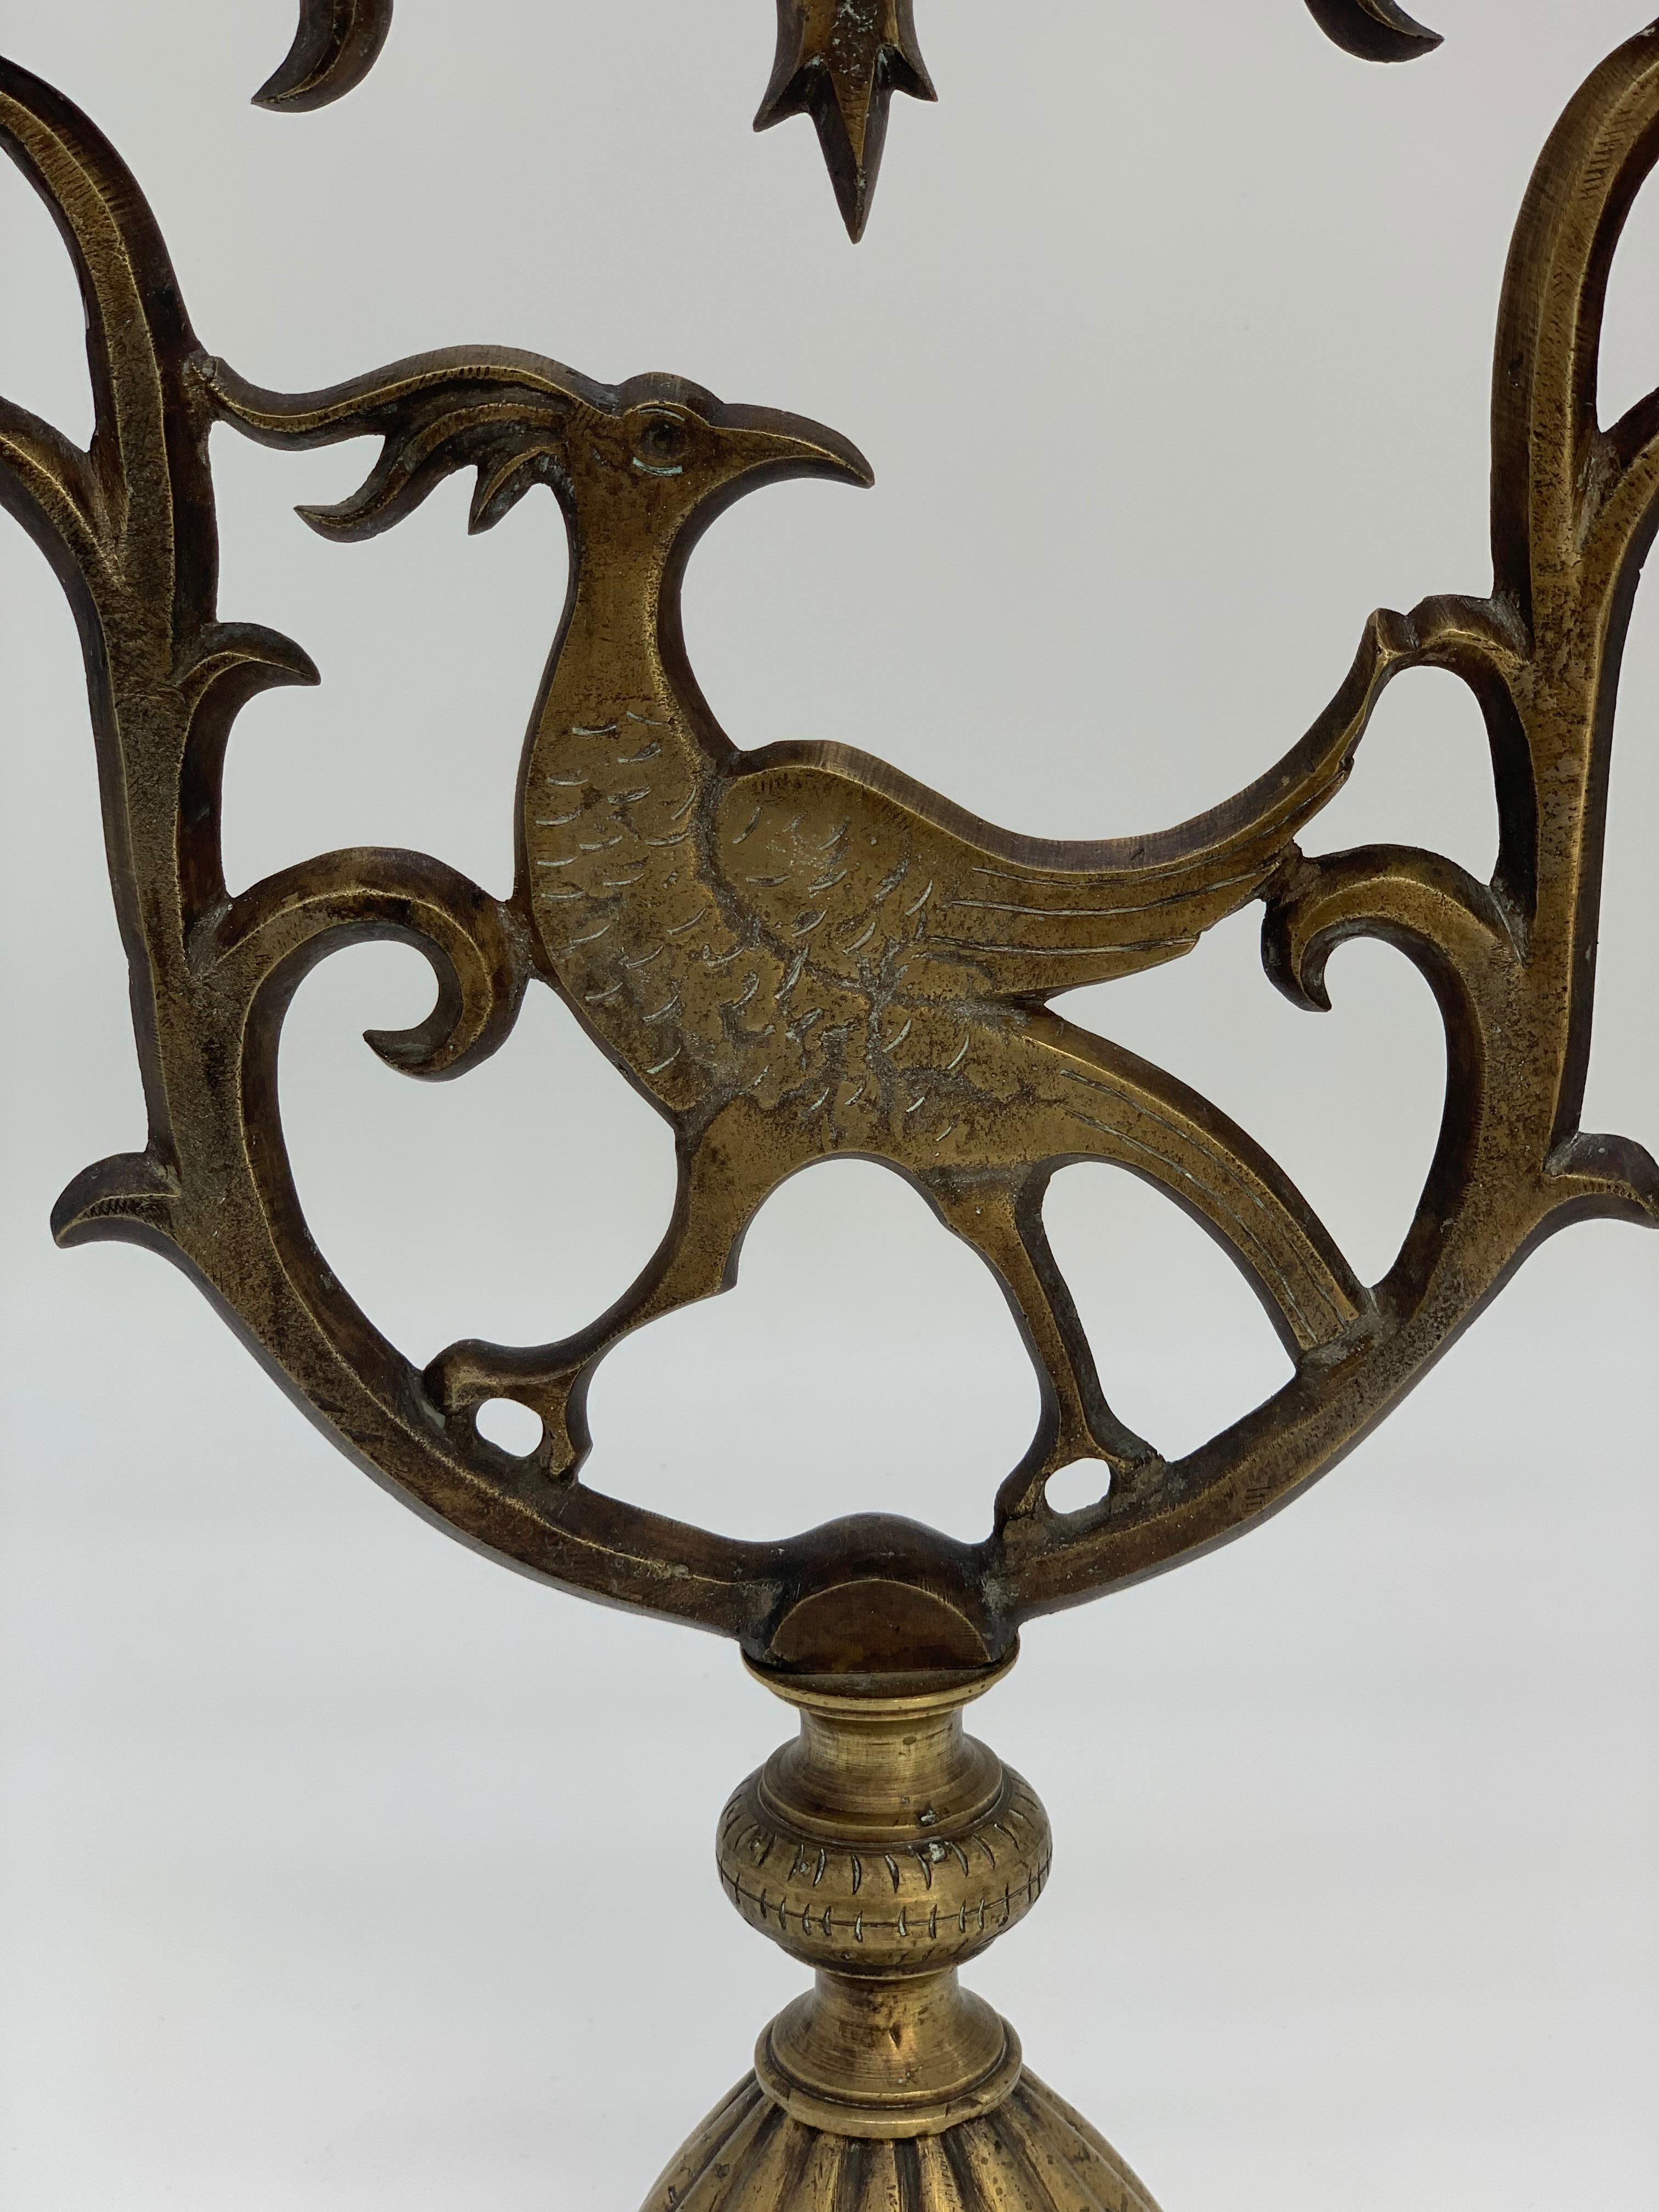 Beautiful bronze Hanukkah candleholder - each candle top can be screwed off and washed separately to get rid of left over wax.
An intricate Pheonix resides in the middle of the Hanukkah candlestick.
Beautiful table decoration,
Late 19th century.